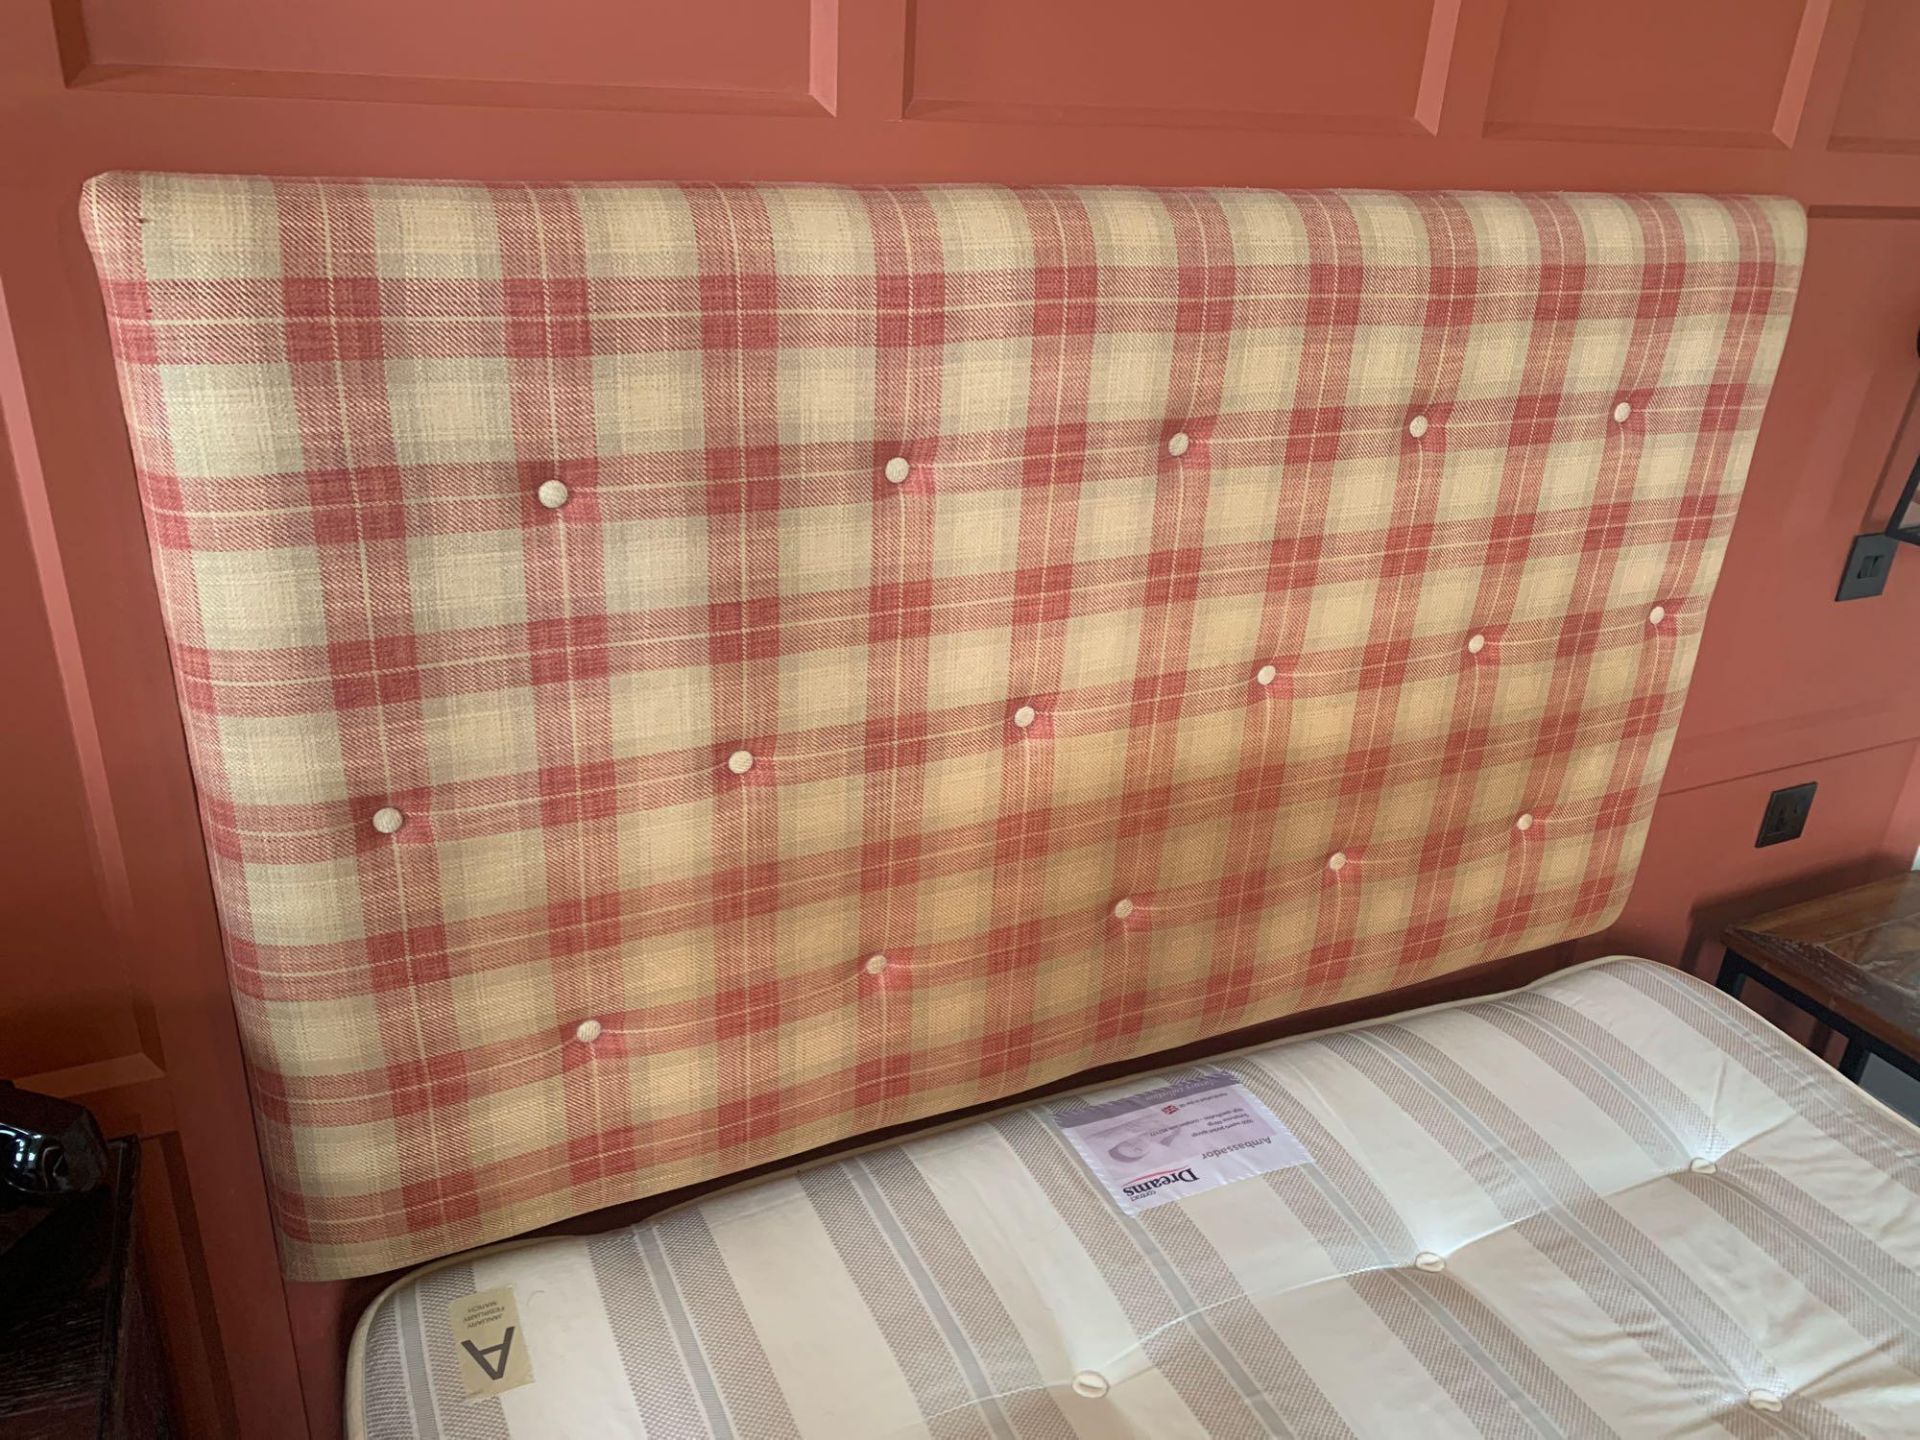 Hospitality Contract King Size Divan Bed Mattress And Headboard Sold With Cushions And Throw 200 - Image 2 of 2